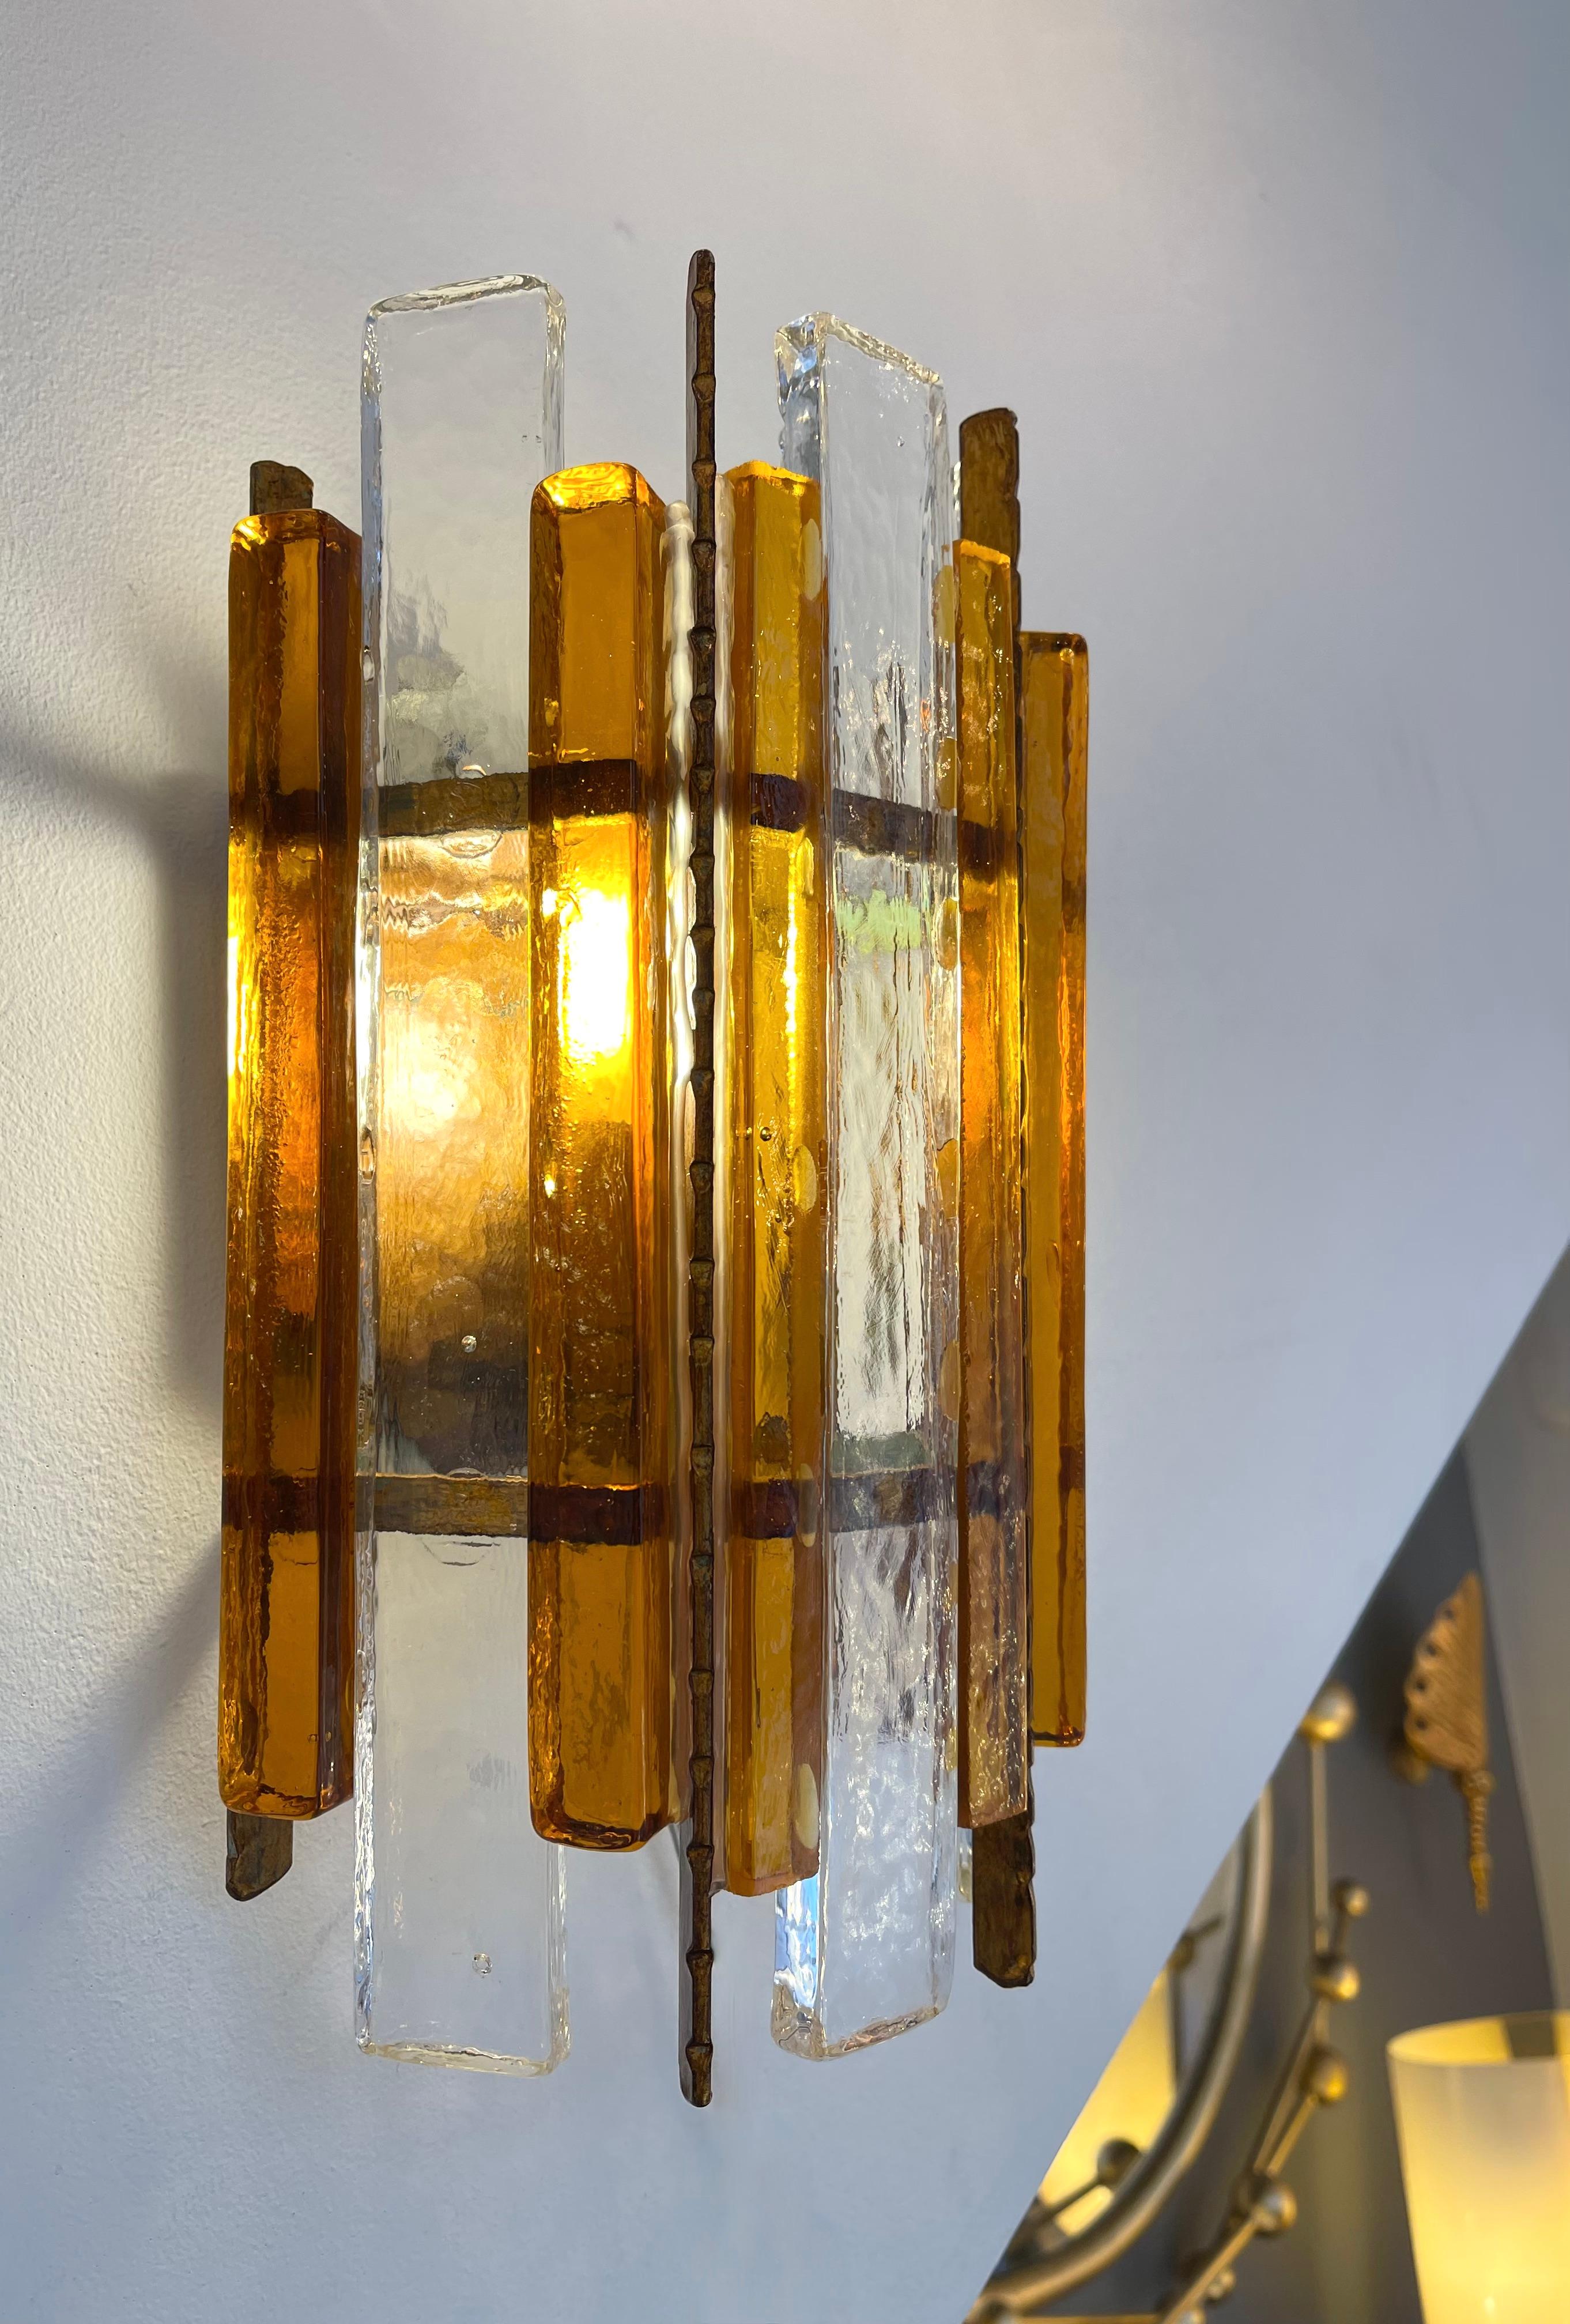 Mid-Century Modern pair of wall lamps lights sconces hammered glass and wrought iron, gilding gold copper patina, by the manufacture Longobard in Verona in a Brutalist style, the concurrent of Biancardi Jordan Arte and Poliarte during the 1970s.